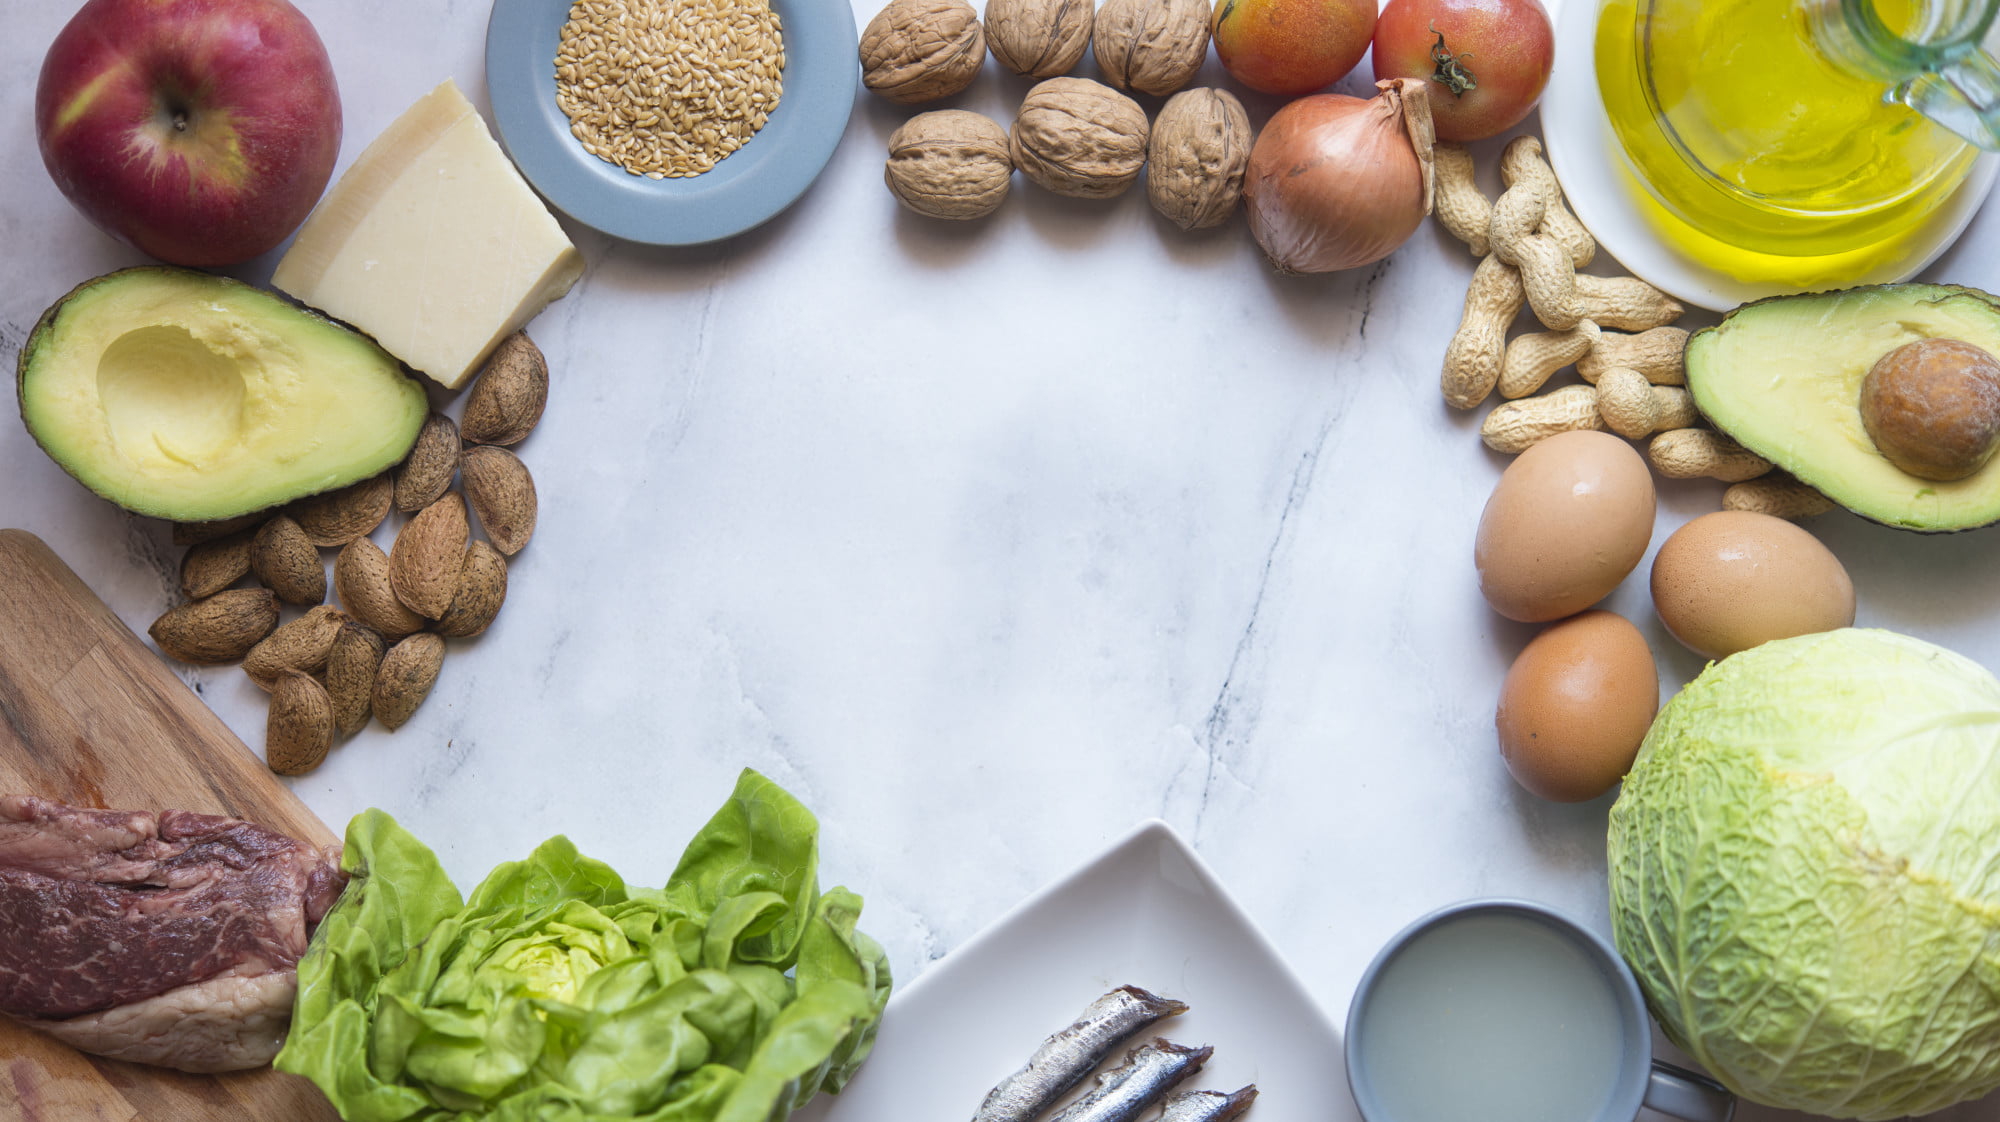 Atkins diet vs keto diet: How much do you know about the differences between the two? Read on to learn more about the differences between them.